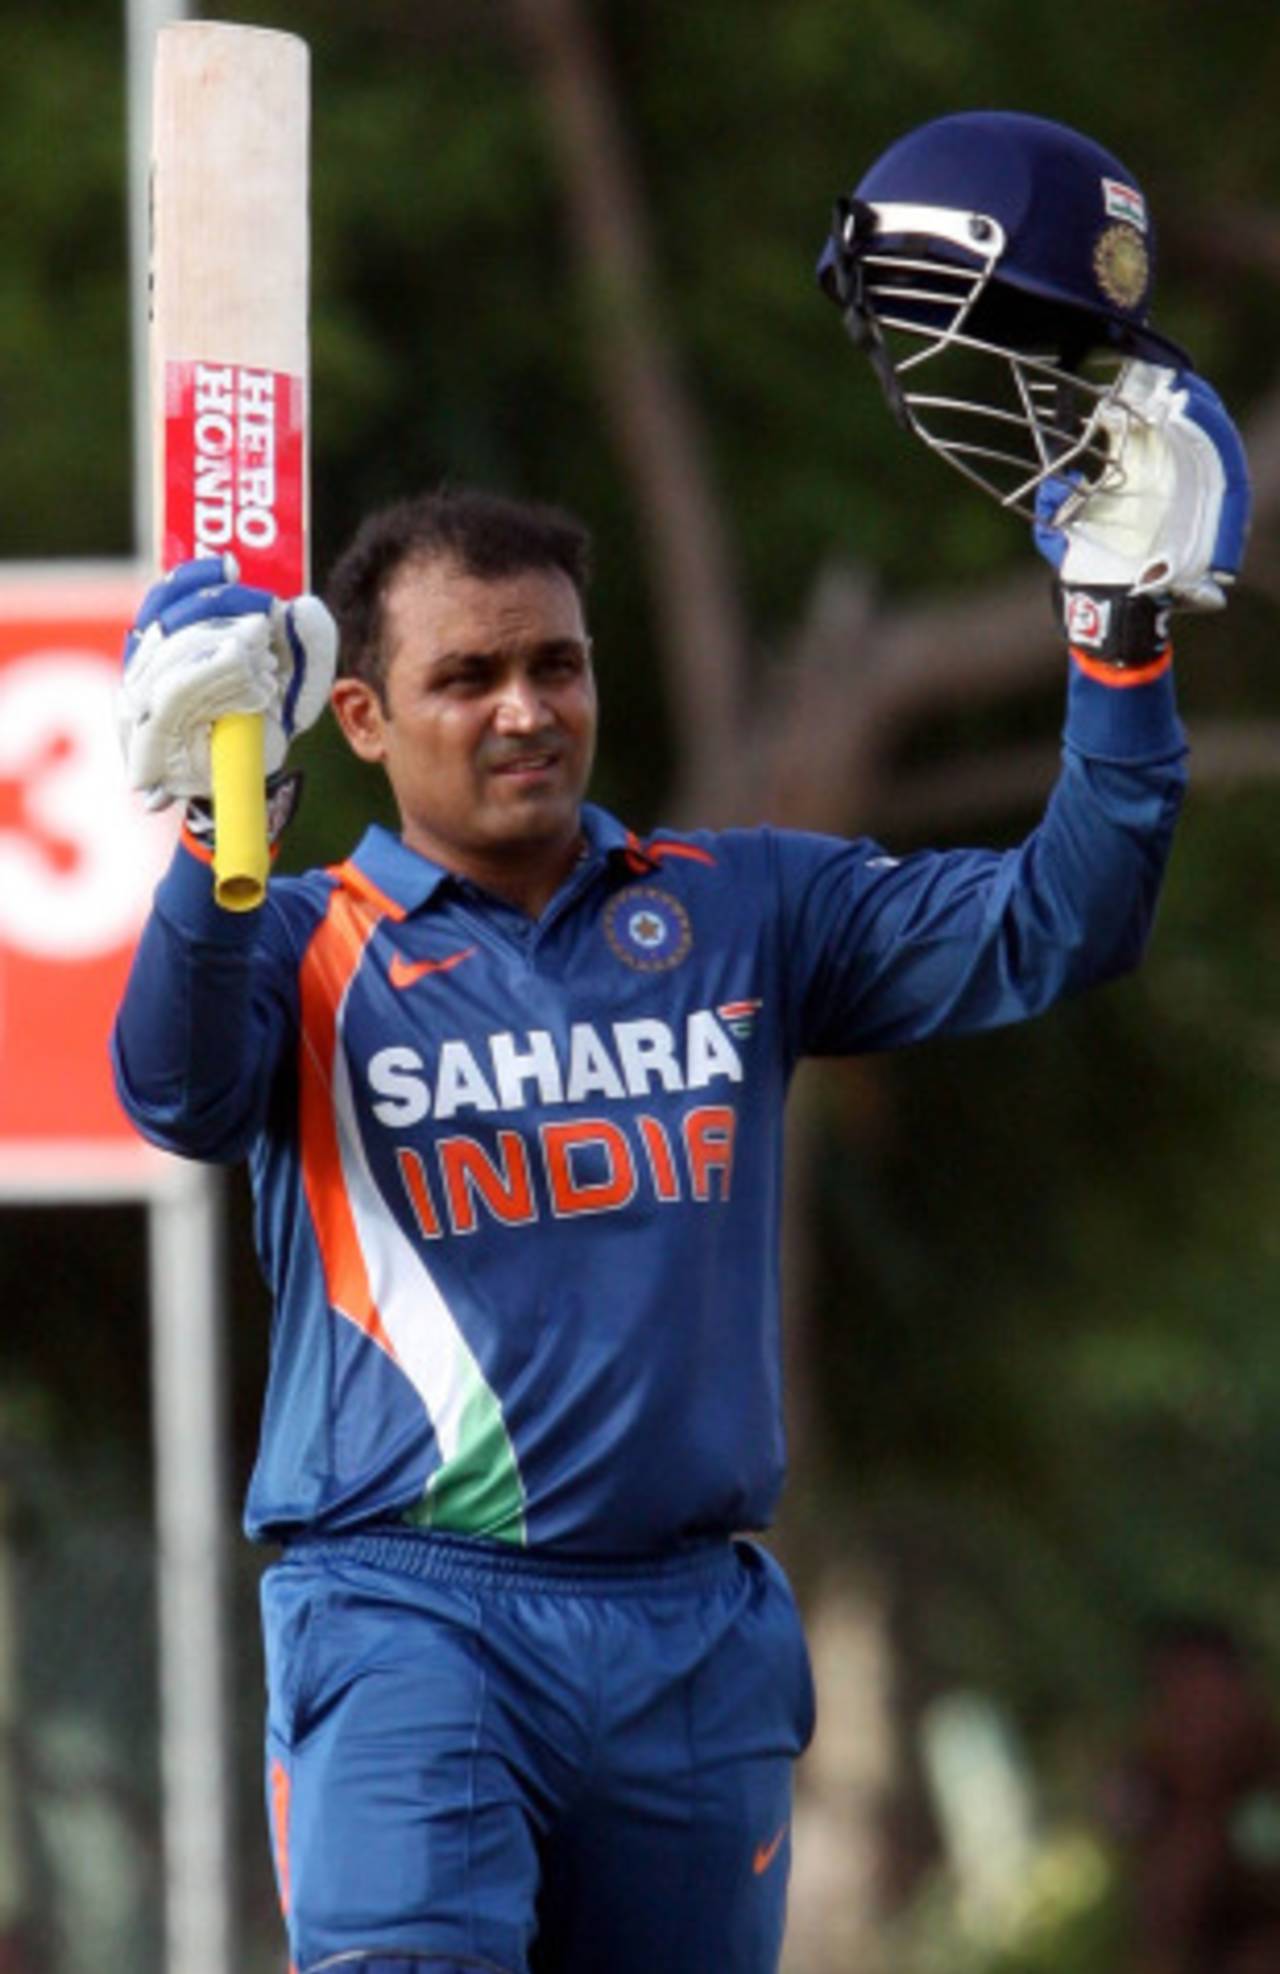 Virender Sehwag's 13th ODI hundred was scored in difficult conditions for batting&nbsp;&nbsp;&bull;&nbsp;&nbsp;Cameraworx/Live Images